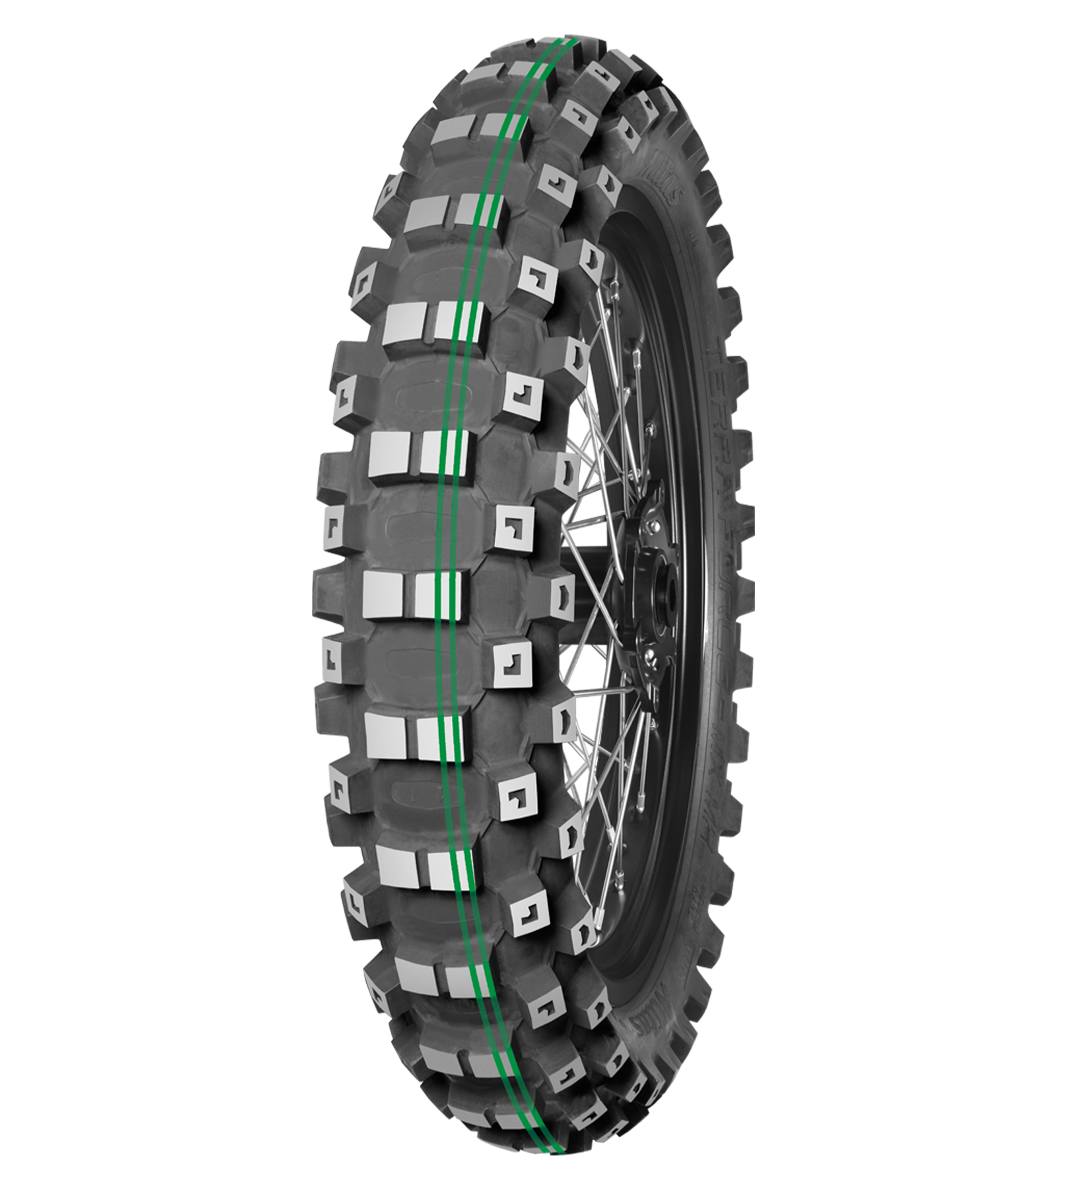 Mitas TERRA FORCE-MX MH 120/90-18 Enduro Competition Off-Road SUPER SOFT EXTREME 65M 2 Green Tube Rear Tire, 226354, 120/90-18, Enduro Competition, Off-Road, Rear, Terra Force, Terra Force-MX MH, Trail, Tires - Imported and distributed in North &amp; South America by Lindeco Genuine Powersports - Premier Powersports Equipment and Accessories for Motorcycle Enthusiasts, Professional Riders and Dealers.